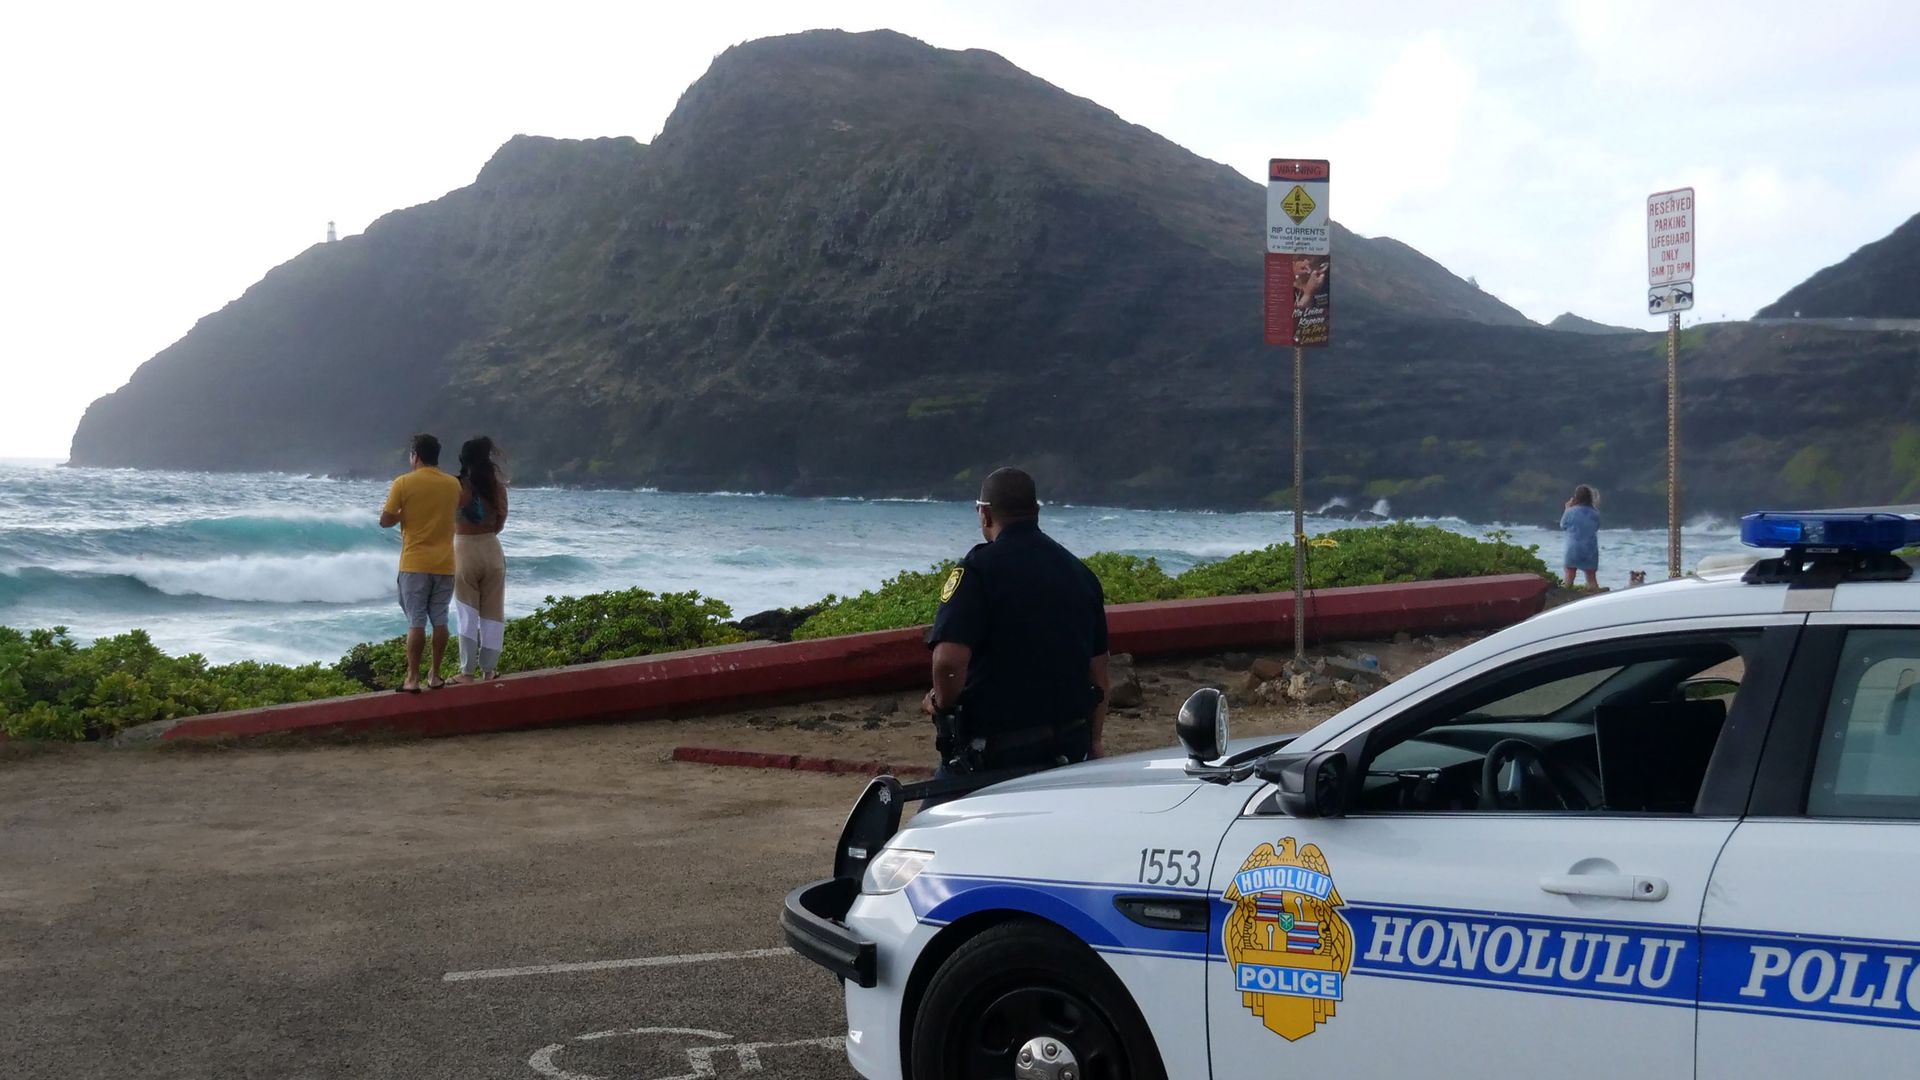 Police wait for people to return to their cars before closing the beach parking lot in preparation for Hurricane Douglas, in Honolulu, Hawaii, on Sunday. 